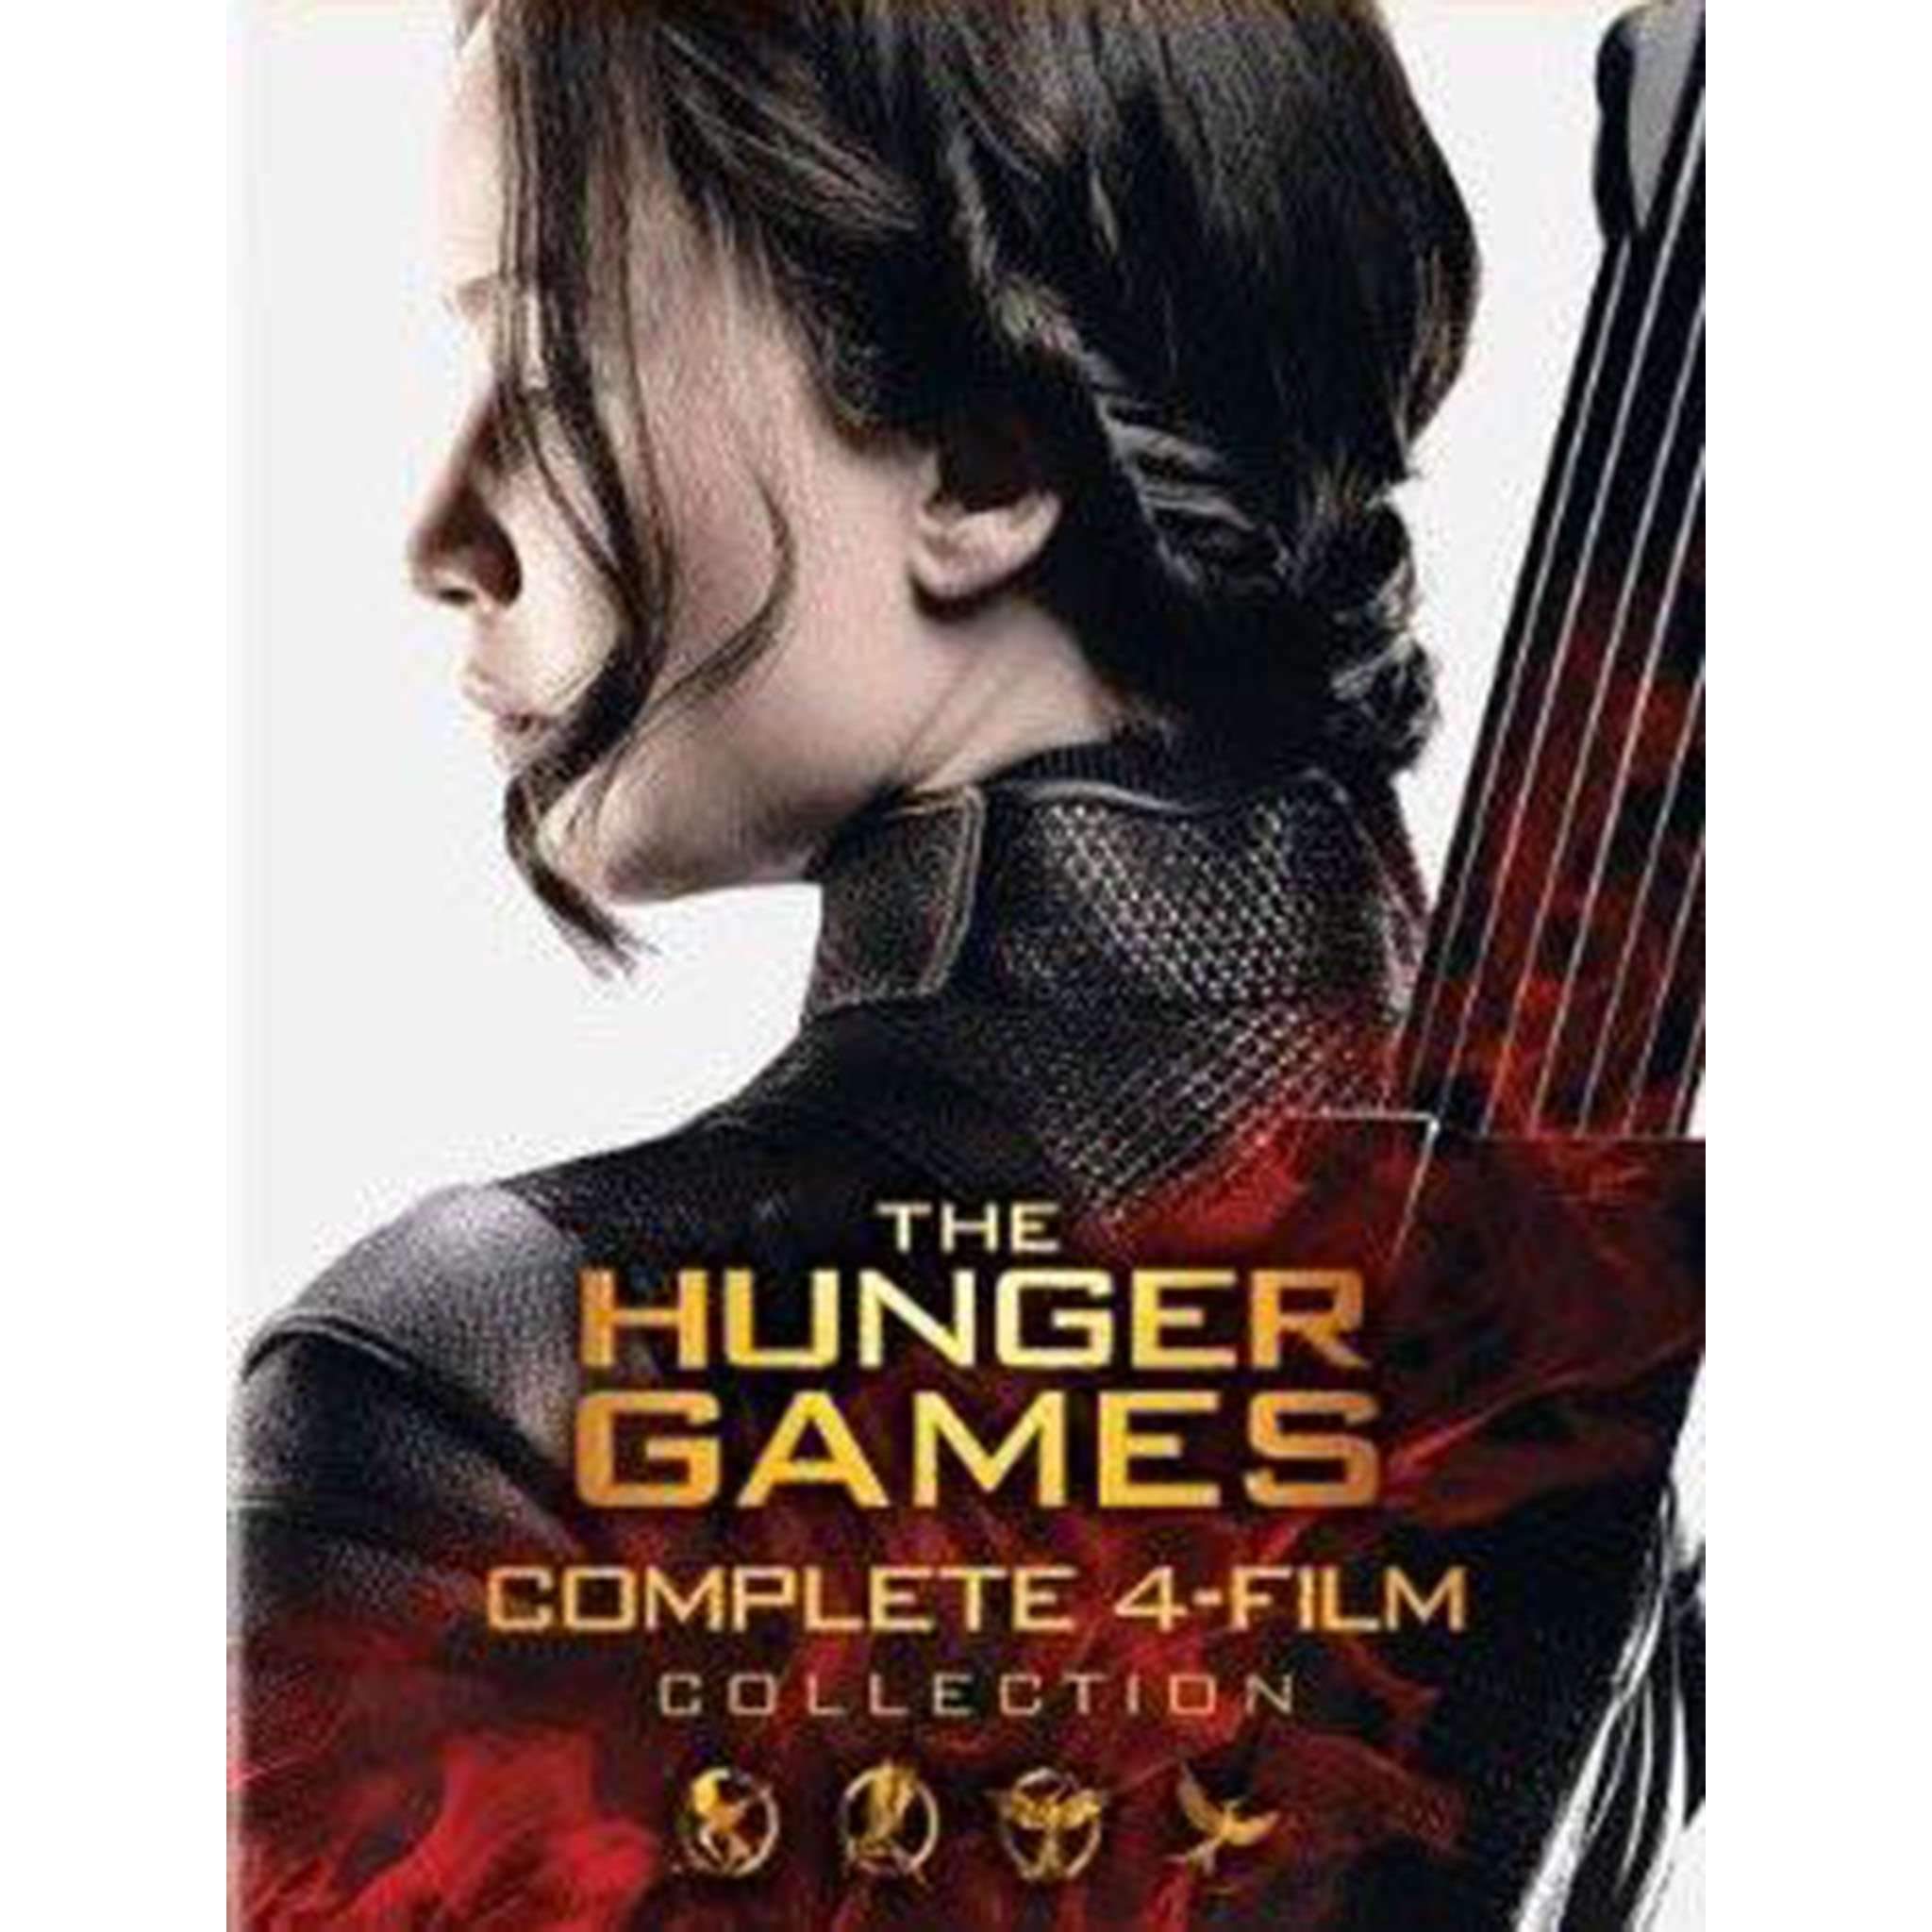 The Hunger Games DVD Complete 4 Film Collection Lionsgate DVDs & Blu-ray Discs > DVDs > Box Sets